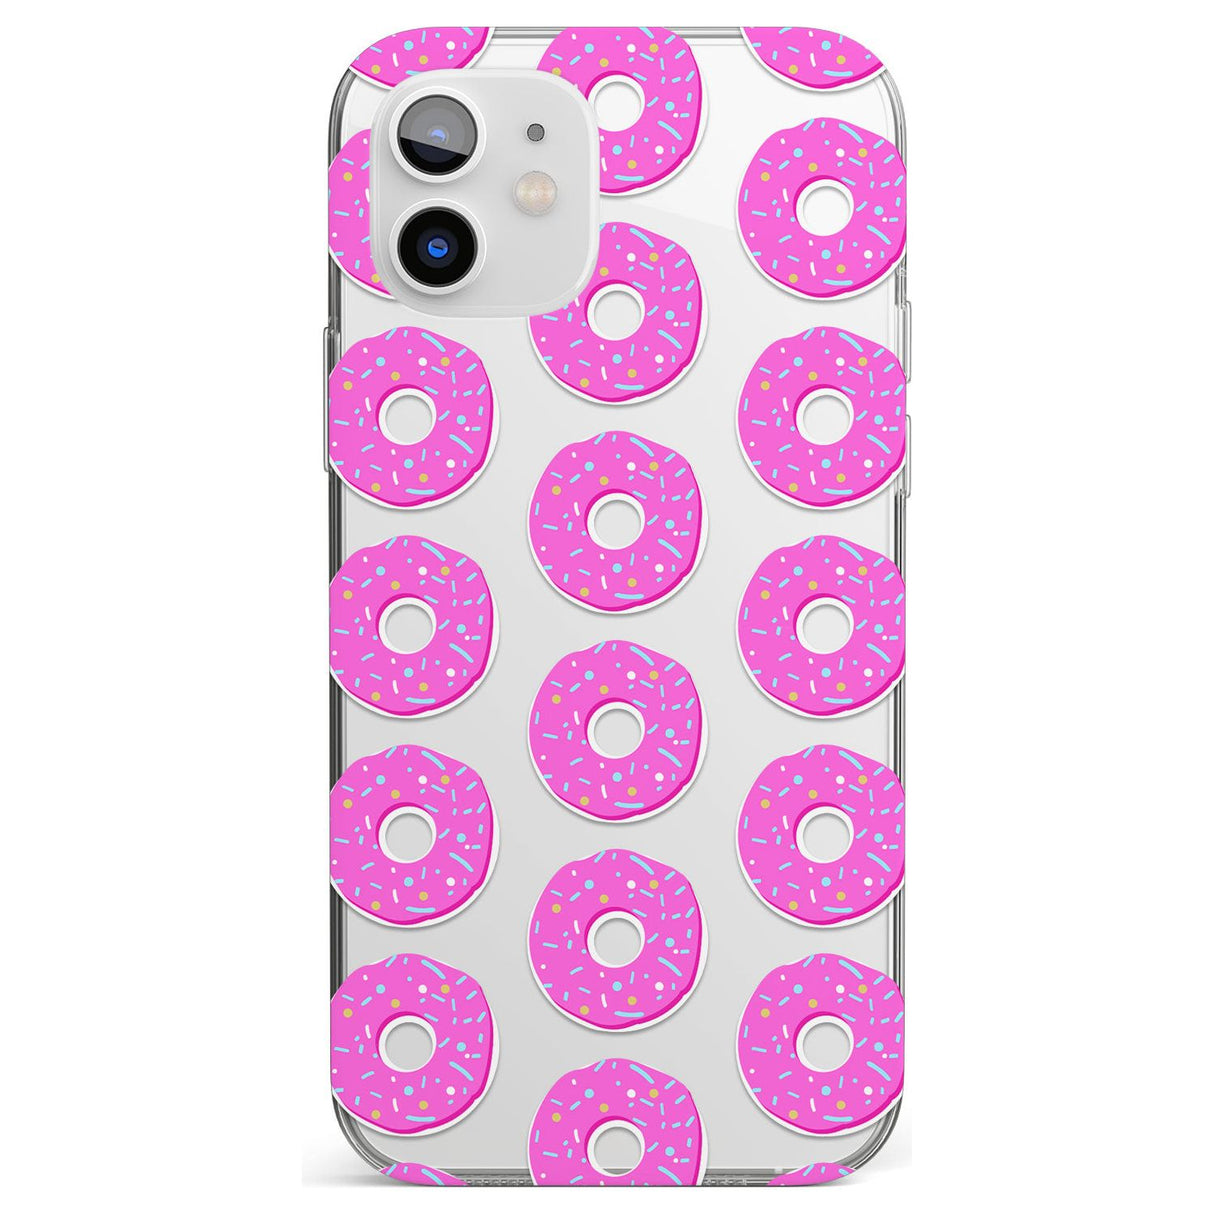 Lollipop Pattern Impact Phone Case for iPhone 11, iphone 12